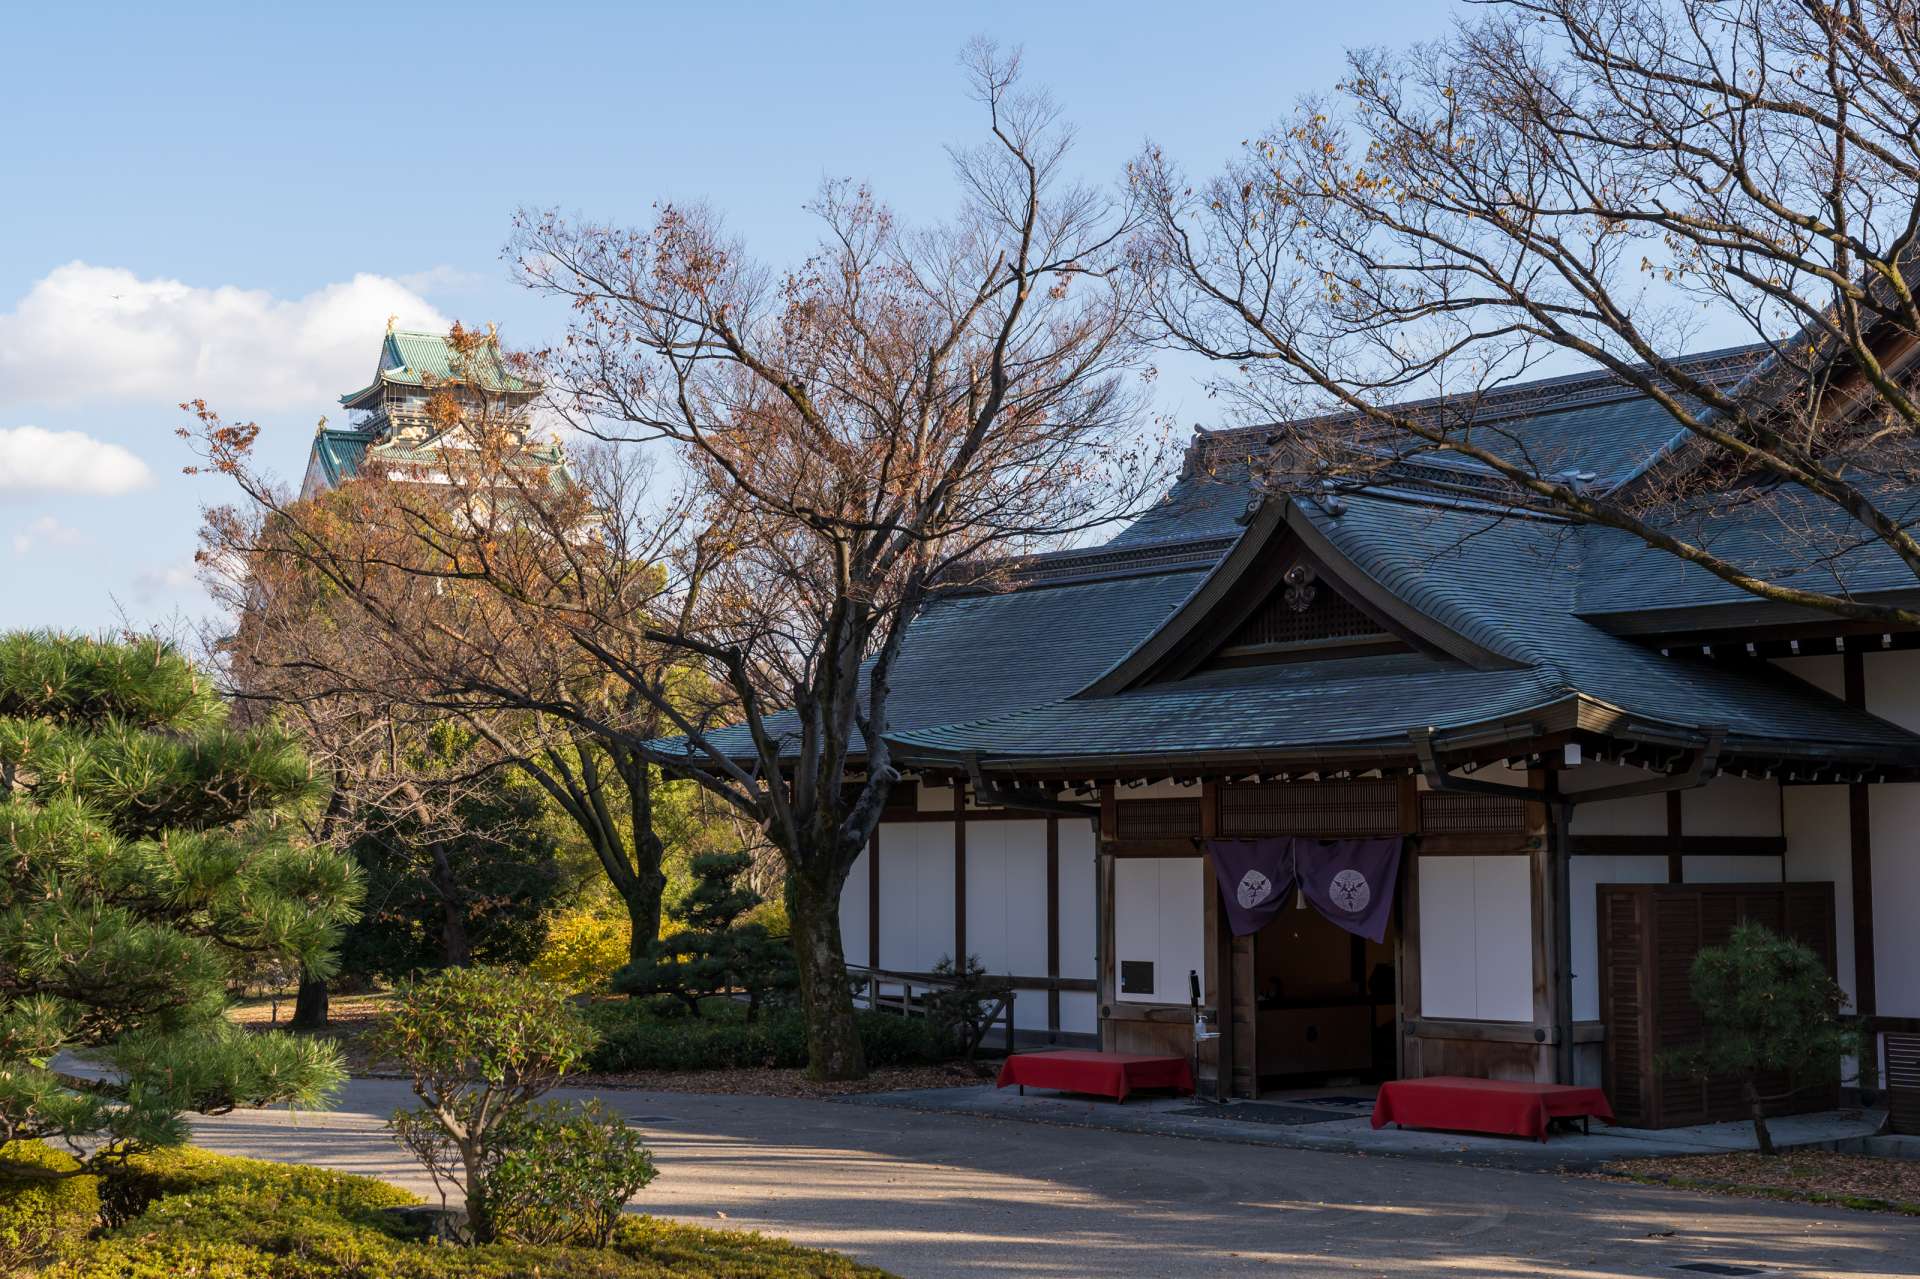 Osaka Geihinkan is a famous tea house that has welcomed world dignitaries from APEC and G20.